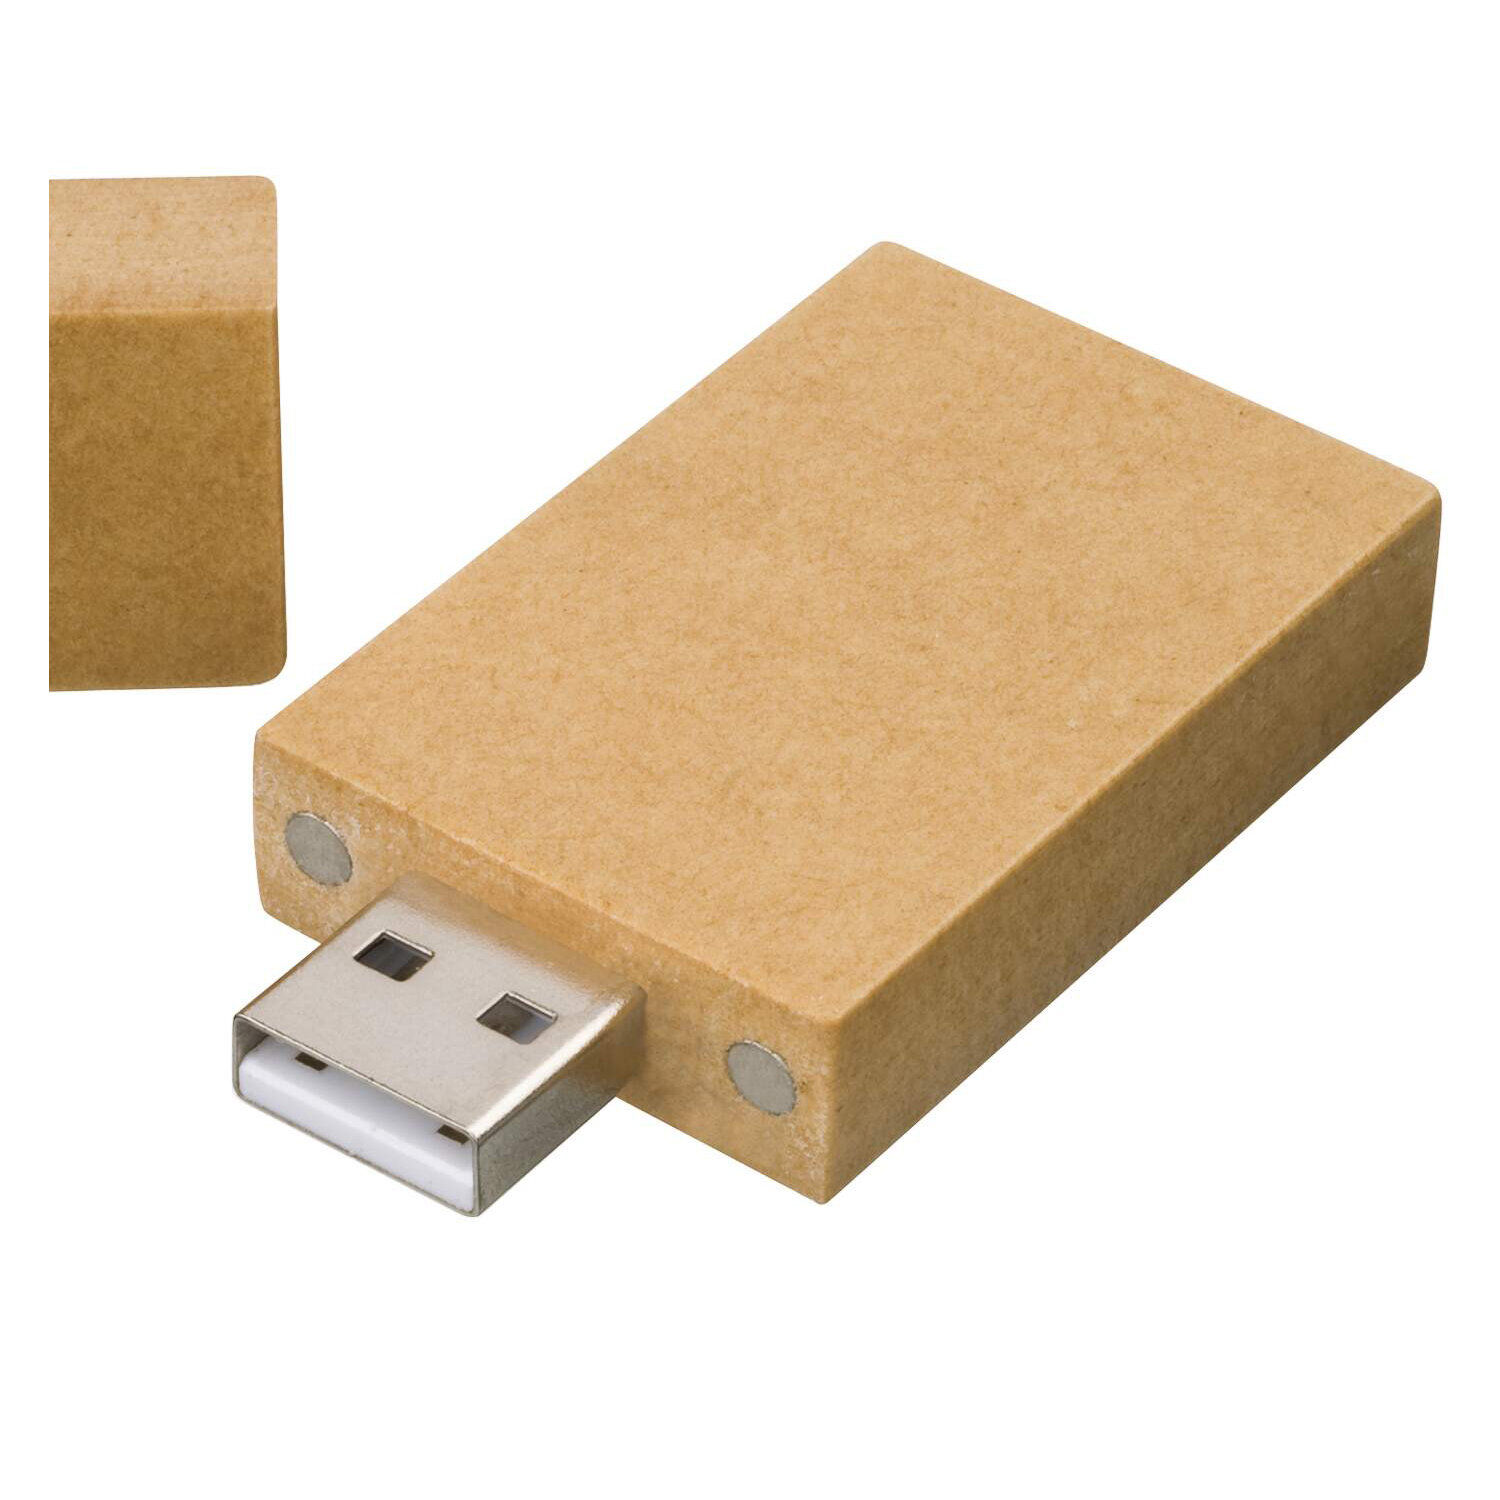 Printed USB Stick made from Recycled Paper